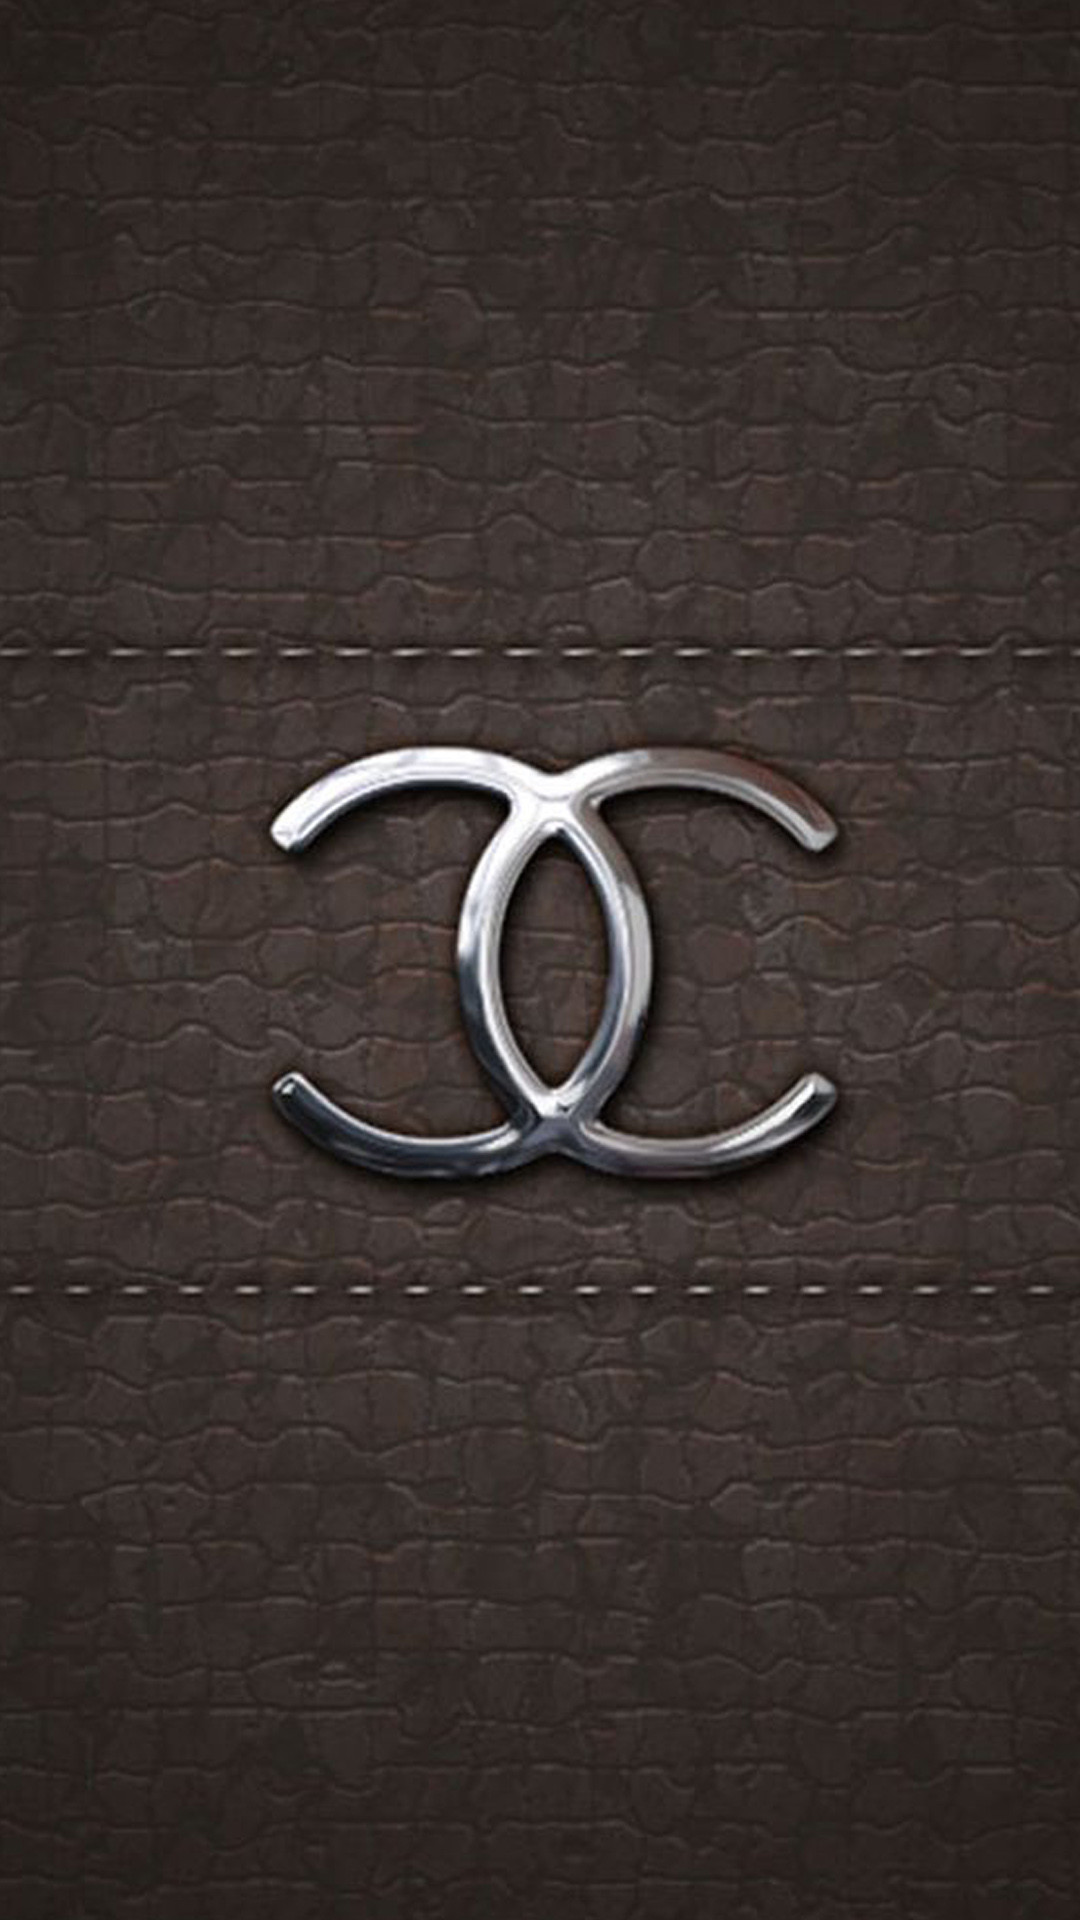 Coco Chanel Iphone Wallpaper 69 Images